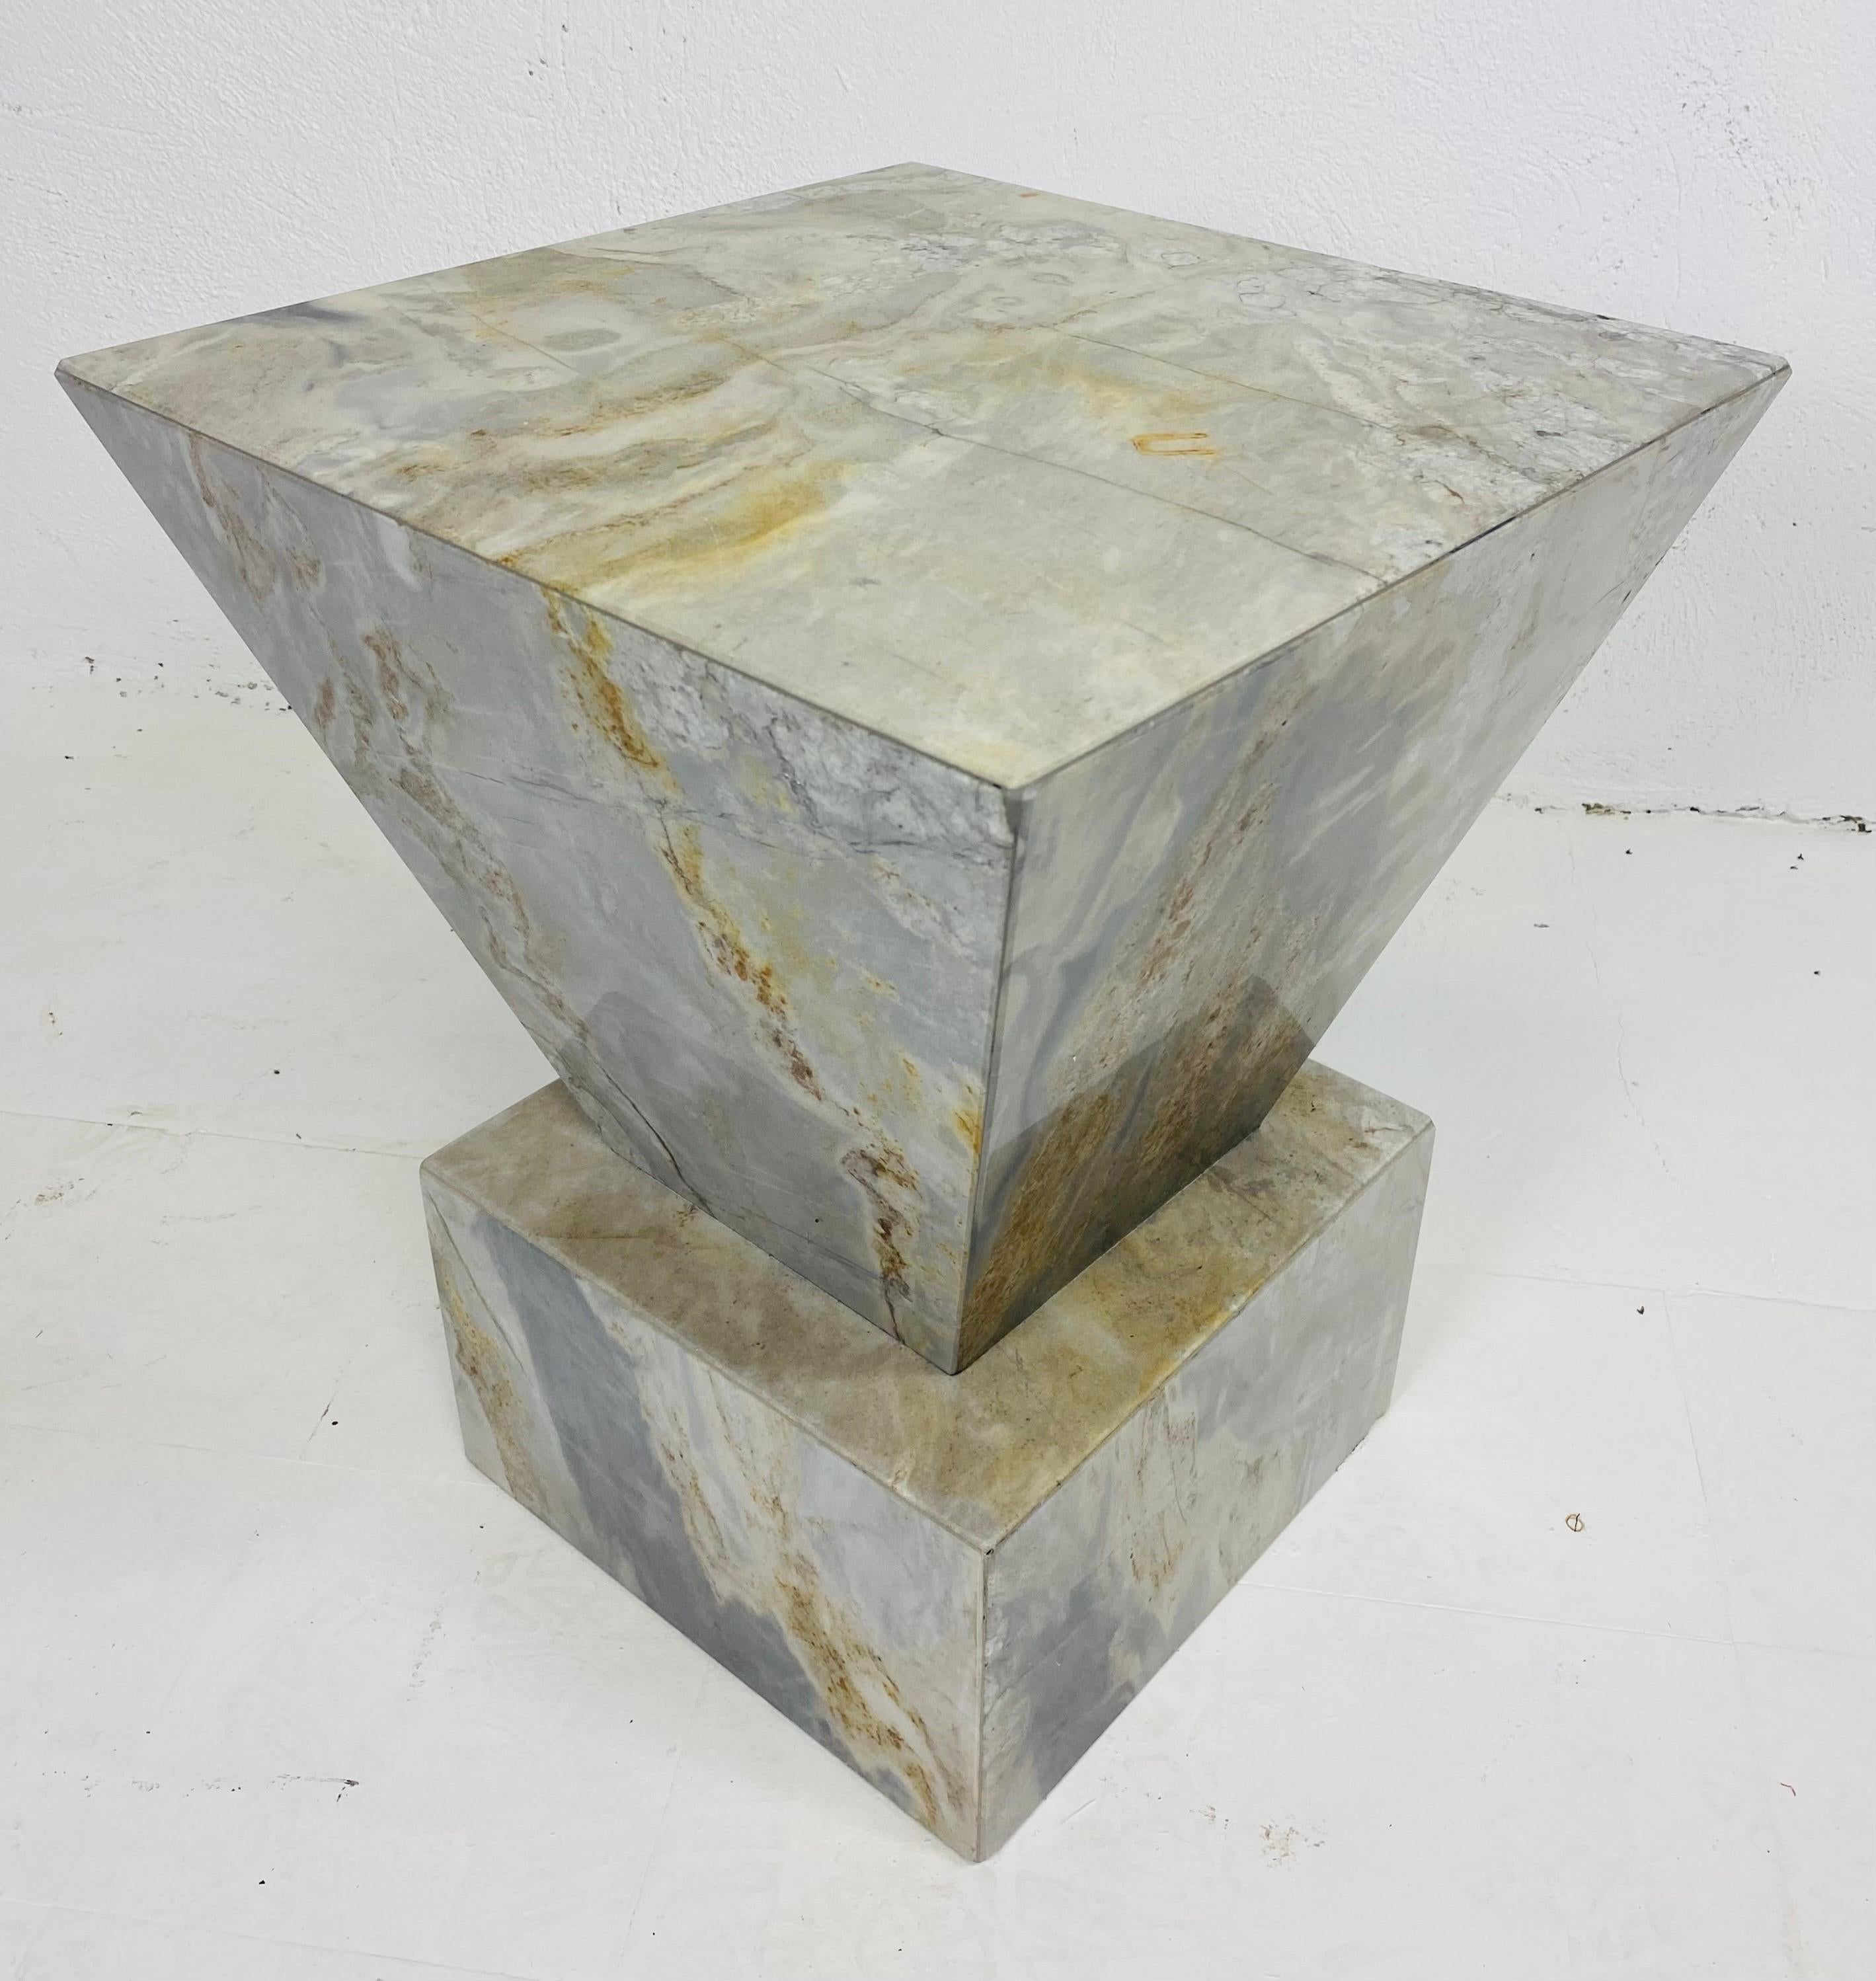 Midcentury Vintage Modern Marble Pedestal / Table In Good Condition For Sale In Allentown, PA